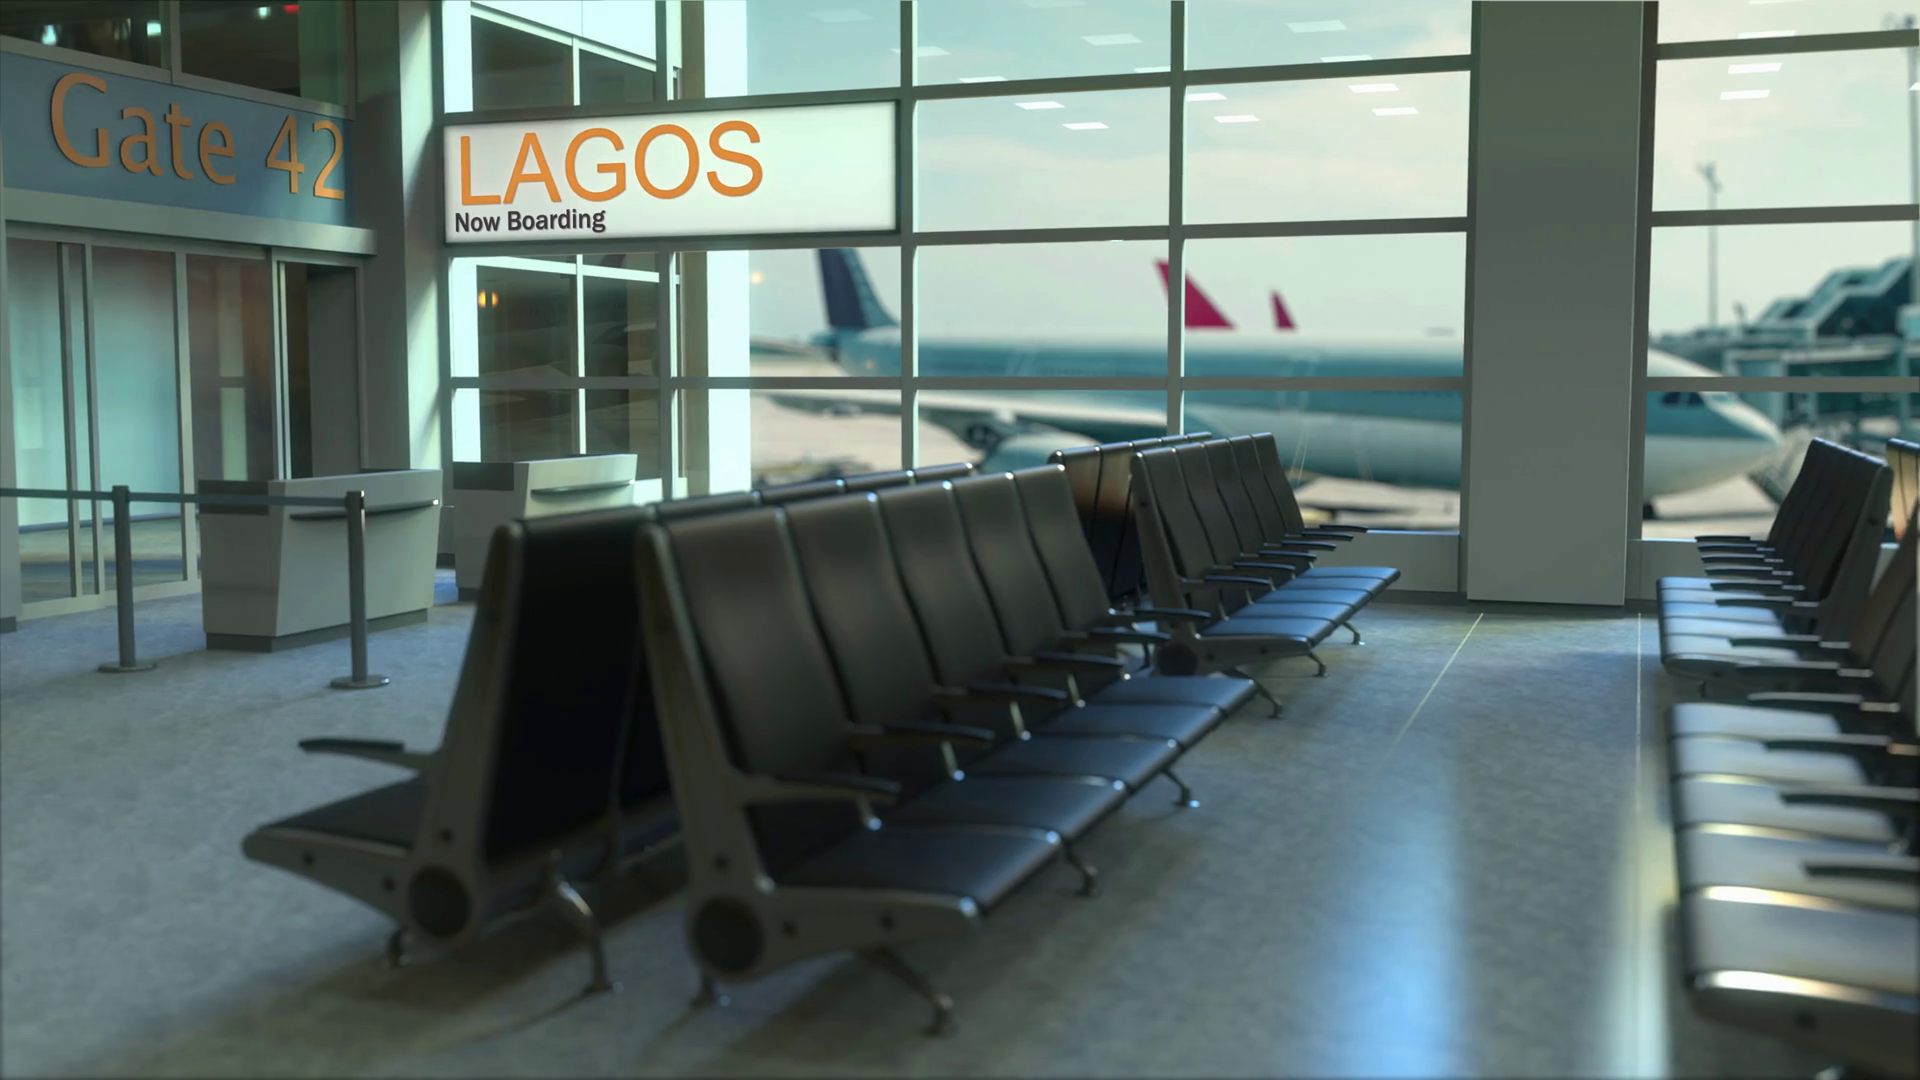 Lagos Flight Boarding Now In The Airport Terminal - Mecca Airport , HD Wallpaper & Backgrounds